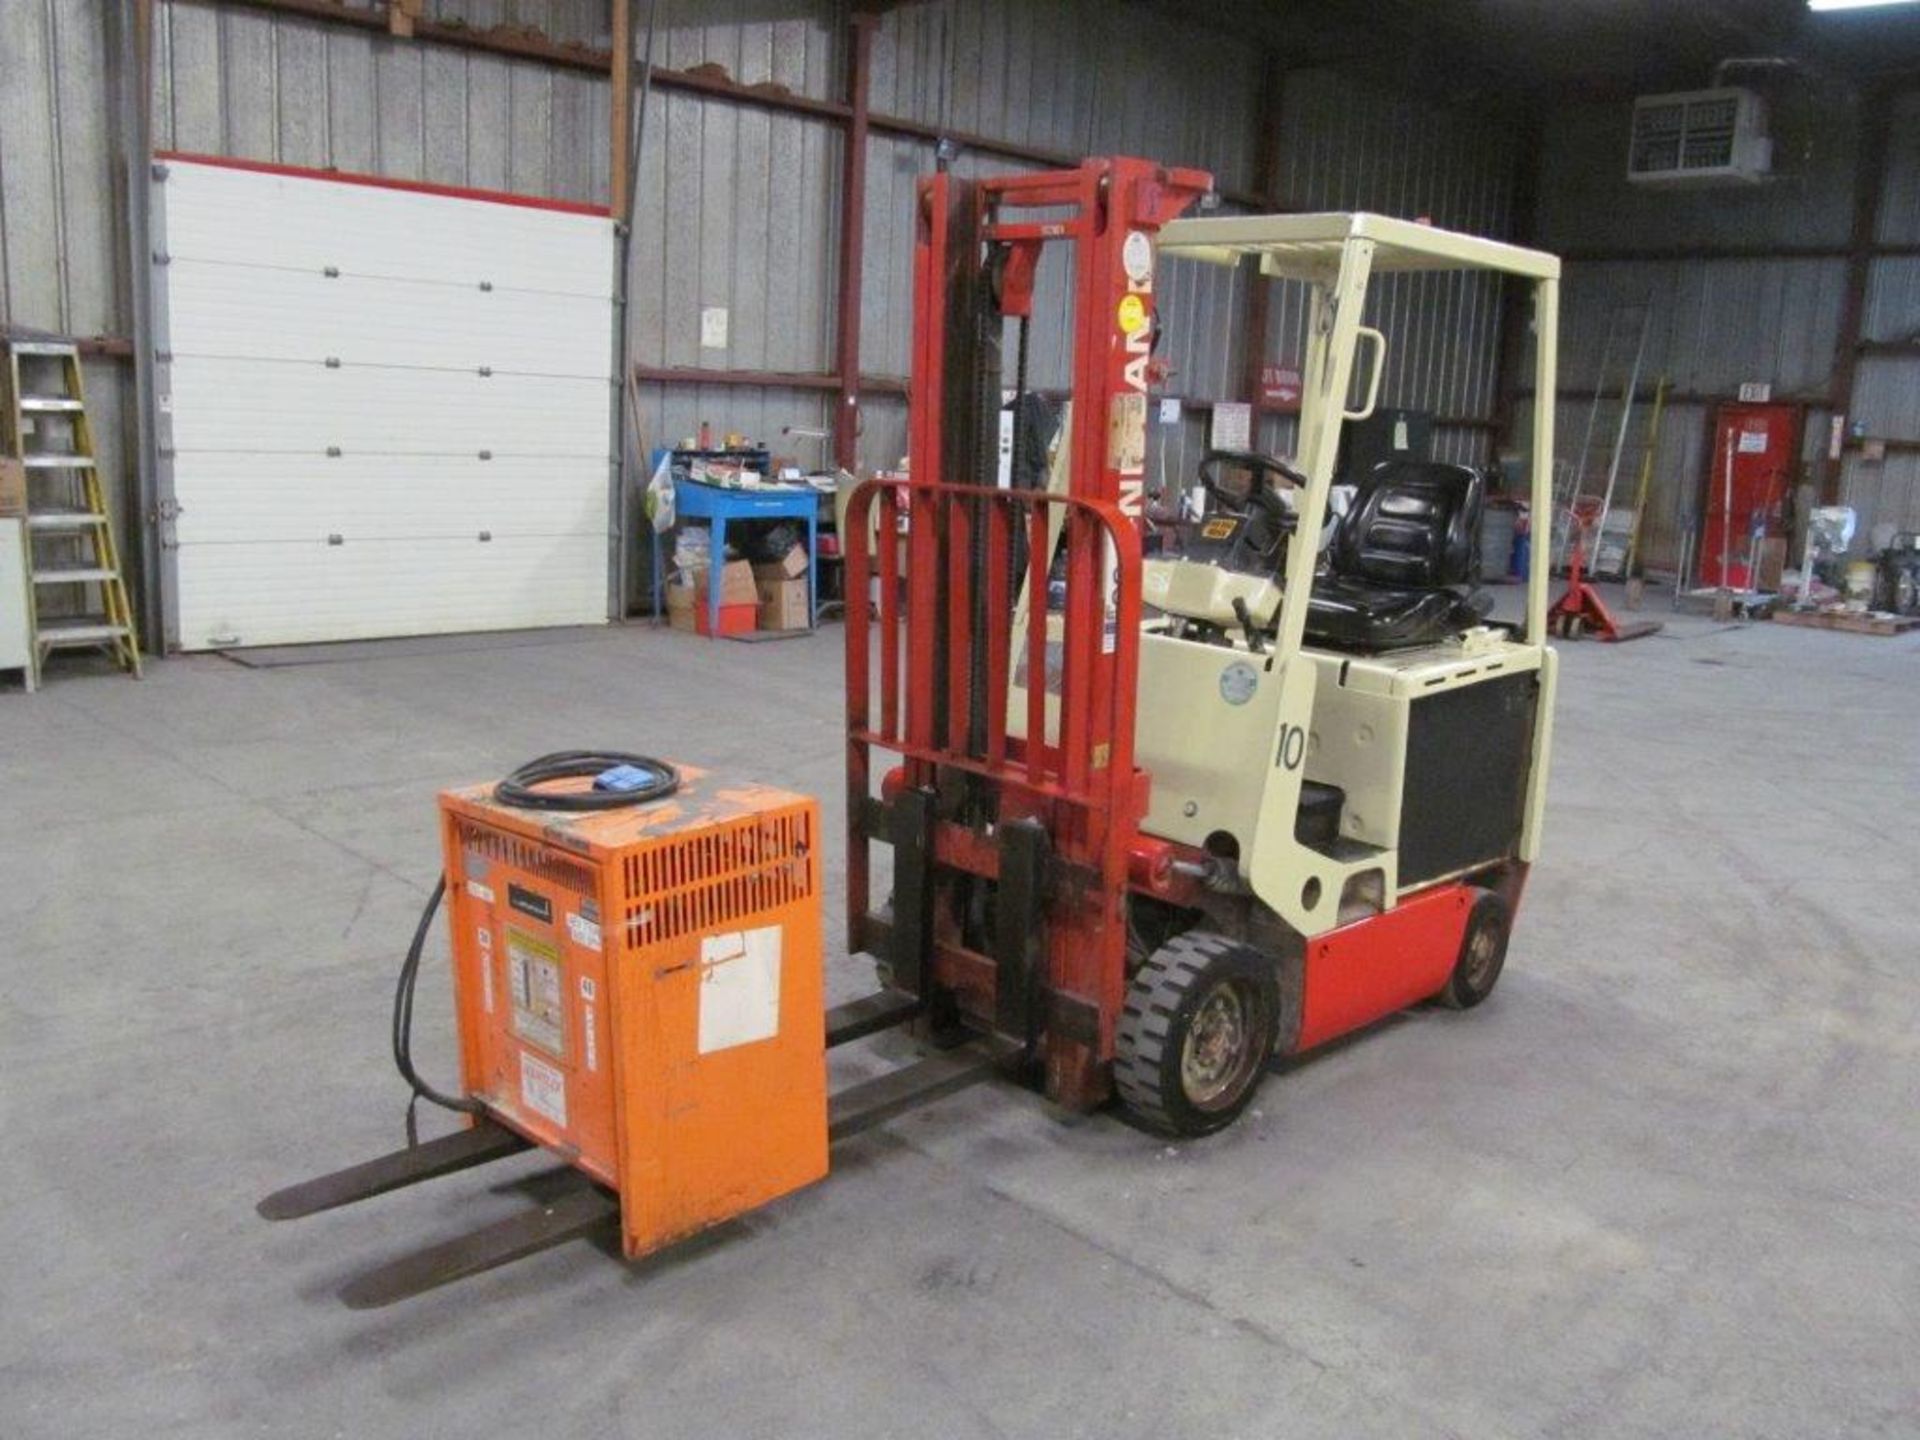 NISSAN ELECTRIC FORKLIFT MODEL CYM02L20S @4000LB CAPACITY 48VOLTS C/W CHARGER "AS-IS"